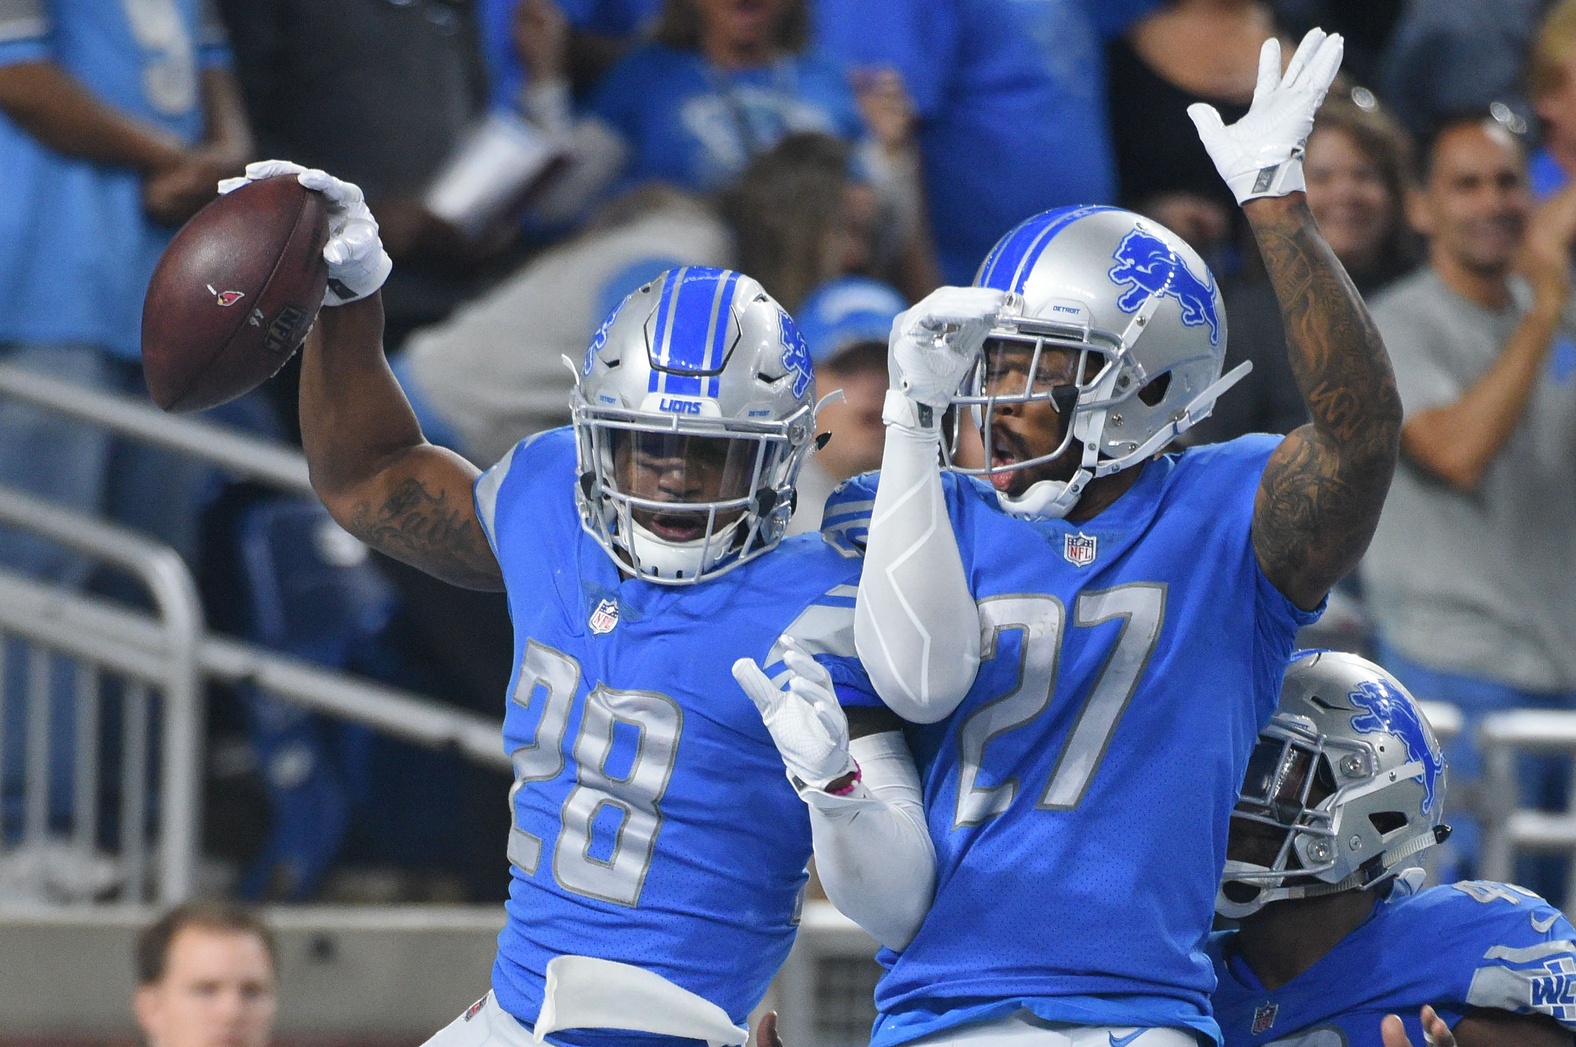 WATCH: Quandre Diggs puts Antonio Brown on his head with incredible tackle1576 x 1047